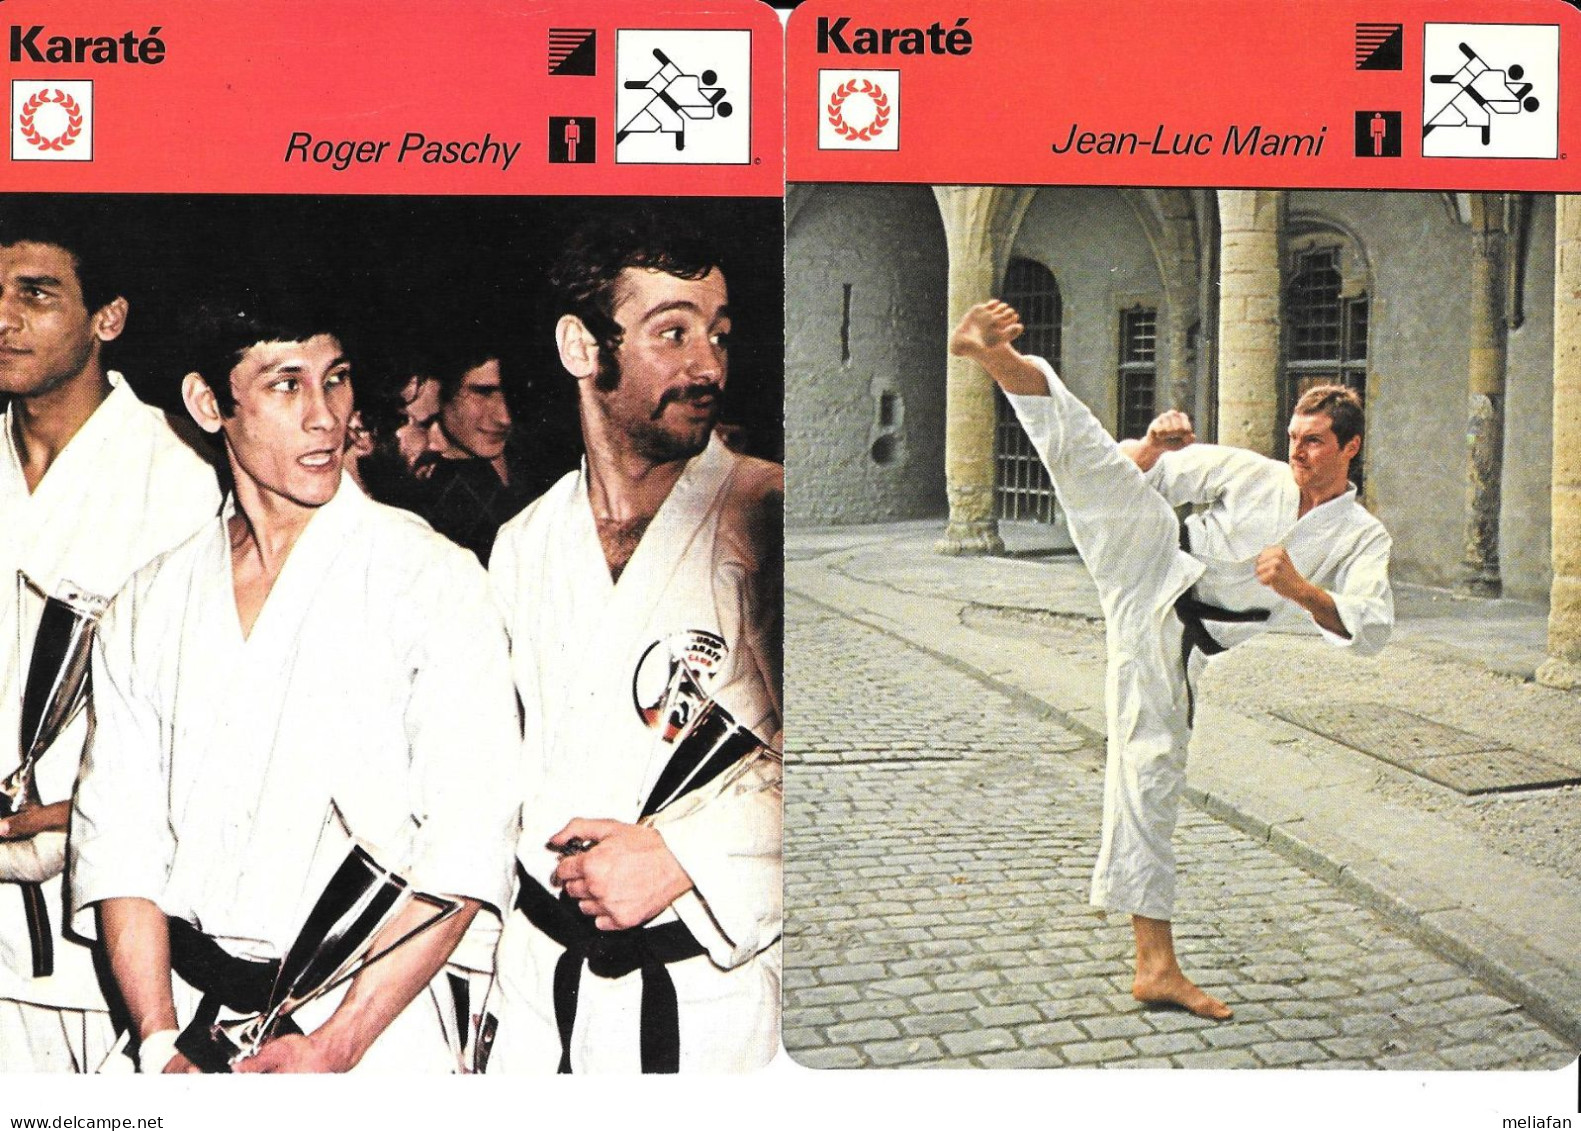 GF1785 - FICHES EDITION RENCONTRE - KARATE - GILBERT GRUSS - GUY SAUVIN - ROGER PASCHY - JEAN LUC MAMI - Artes Marciales